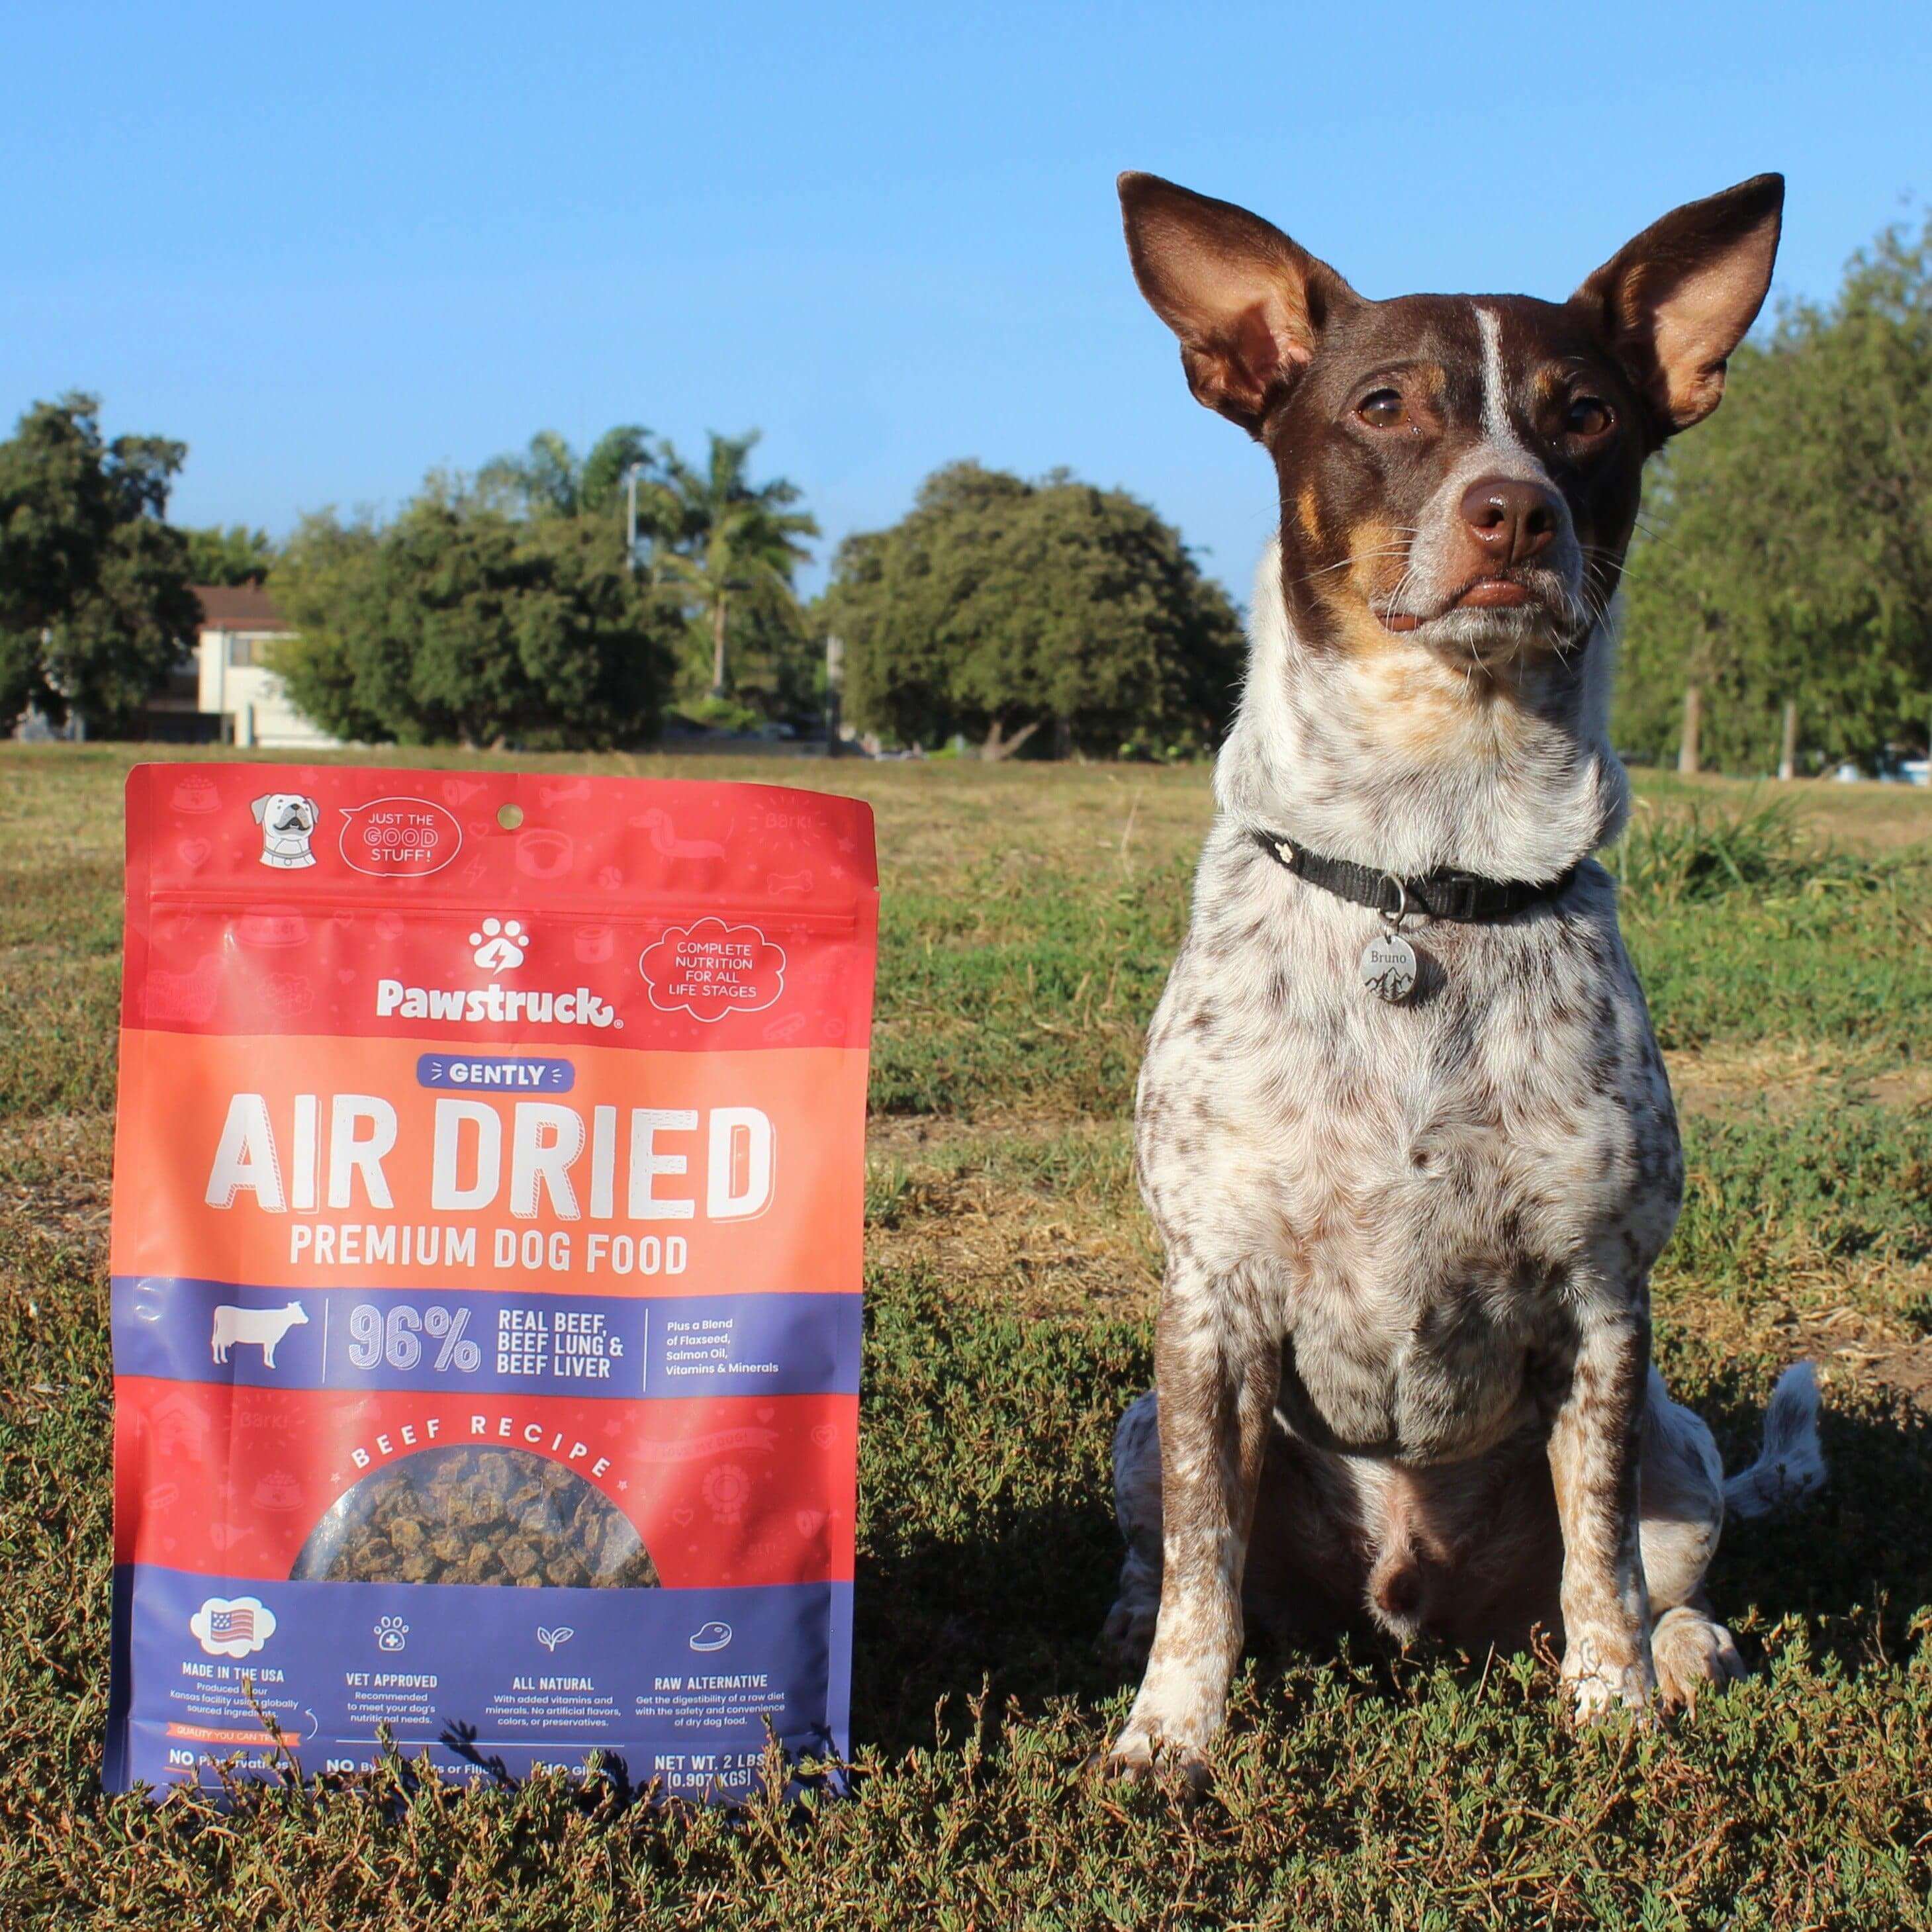 Small brown and white dog on grass with bag of Air Dried Beef dog food